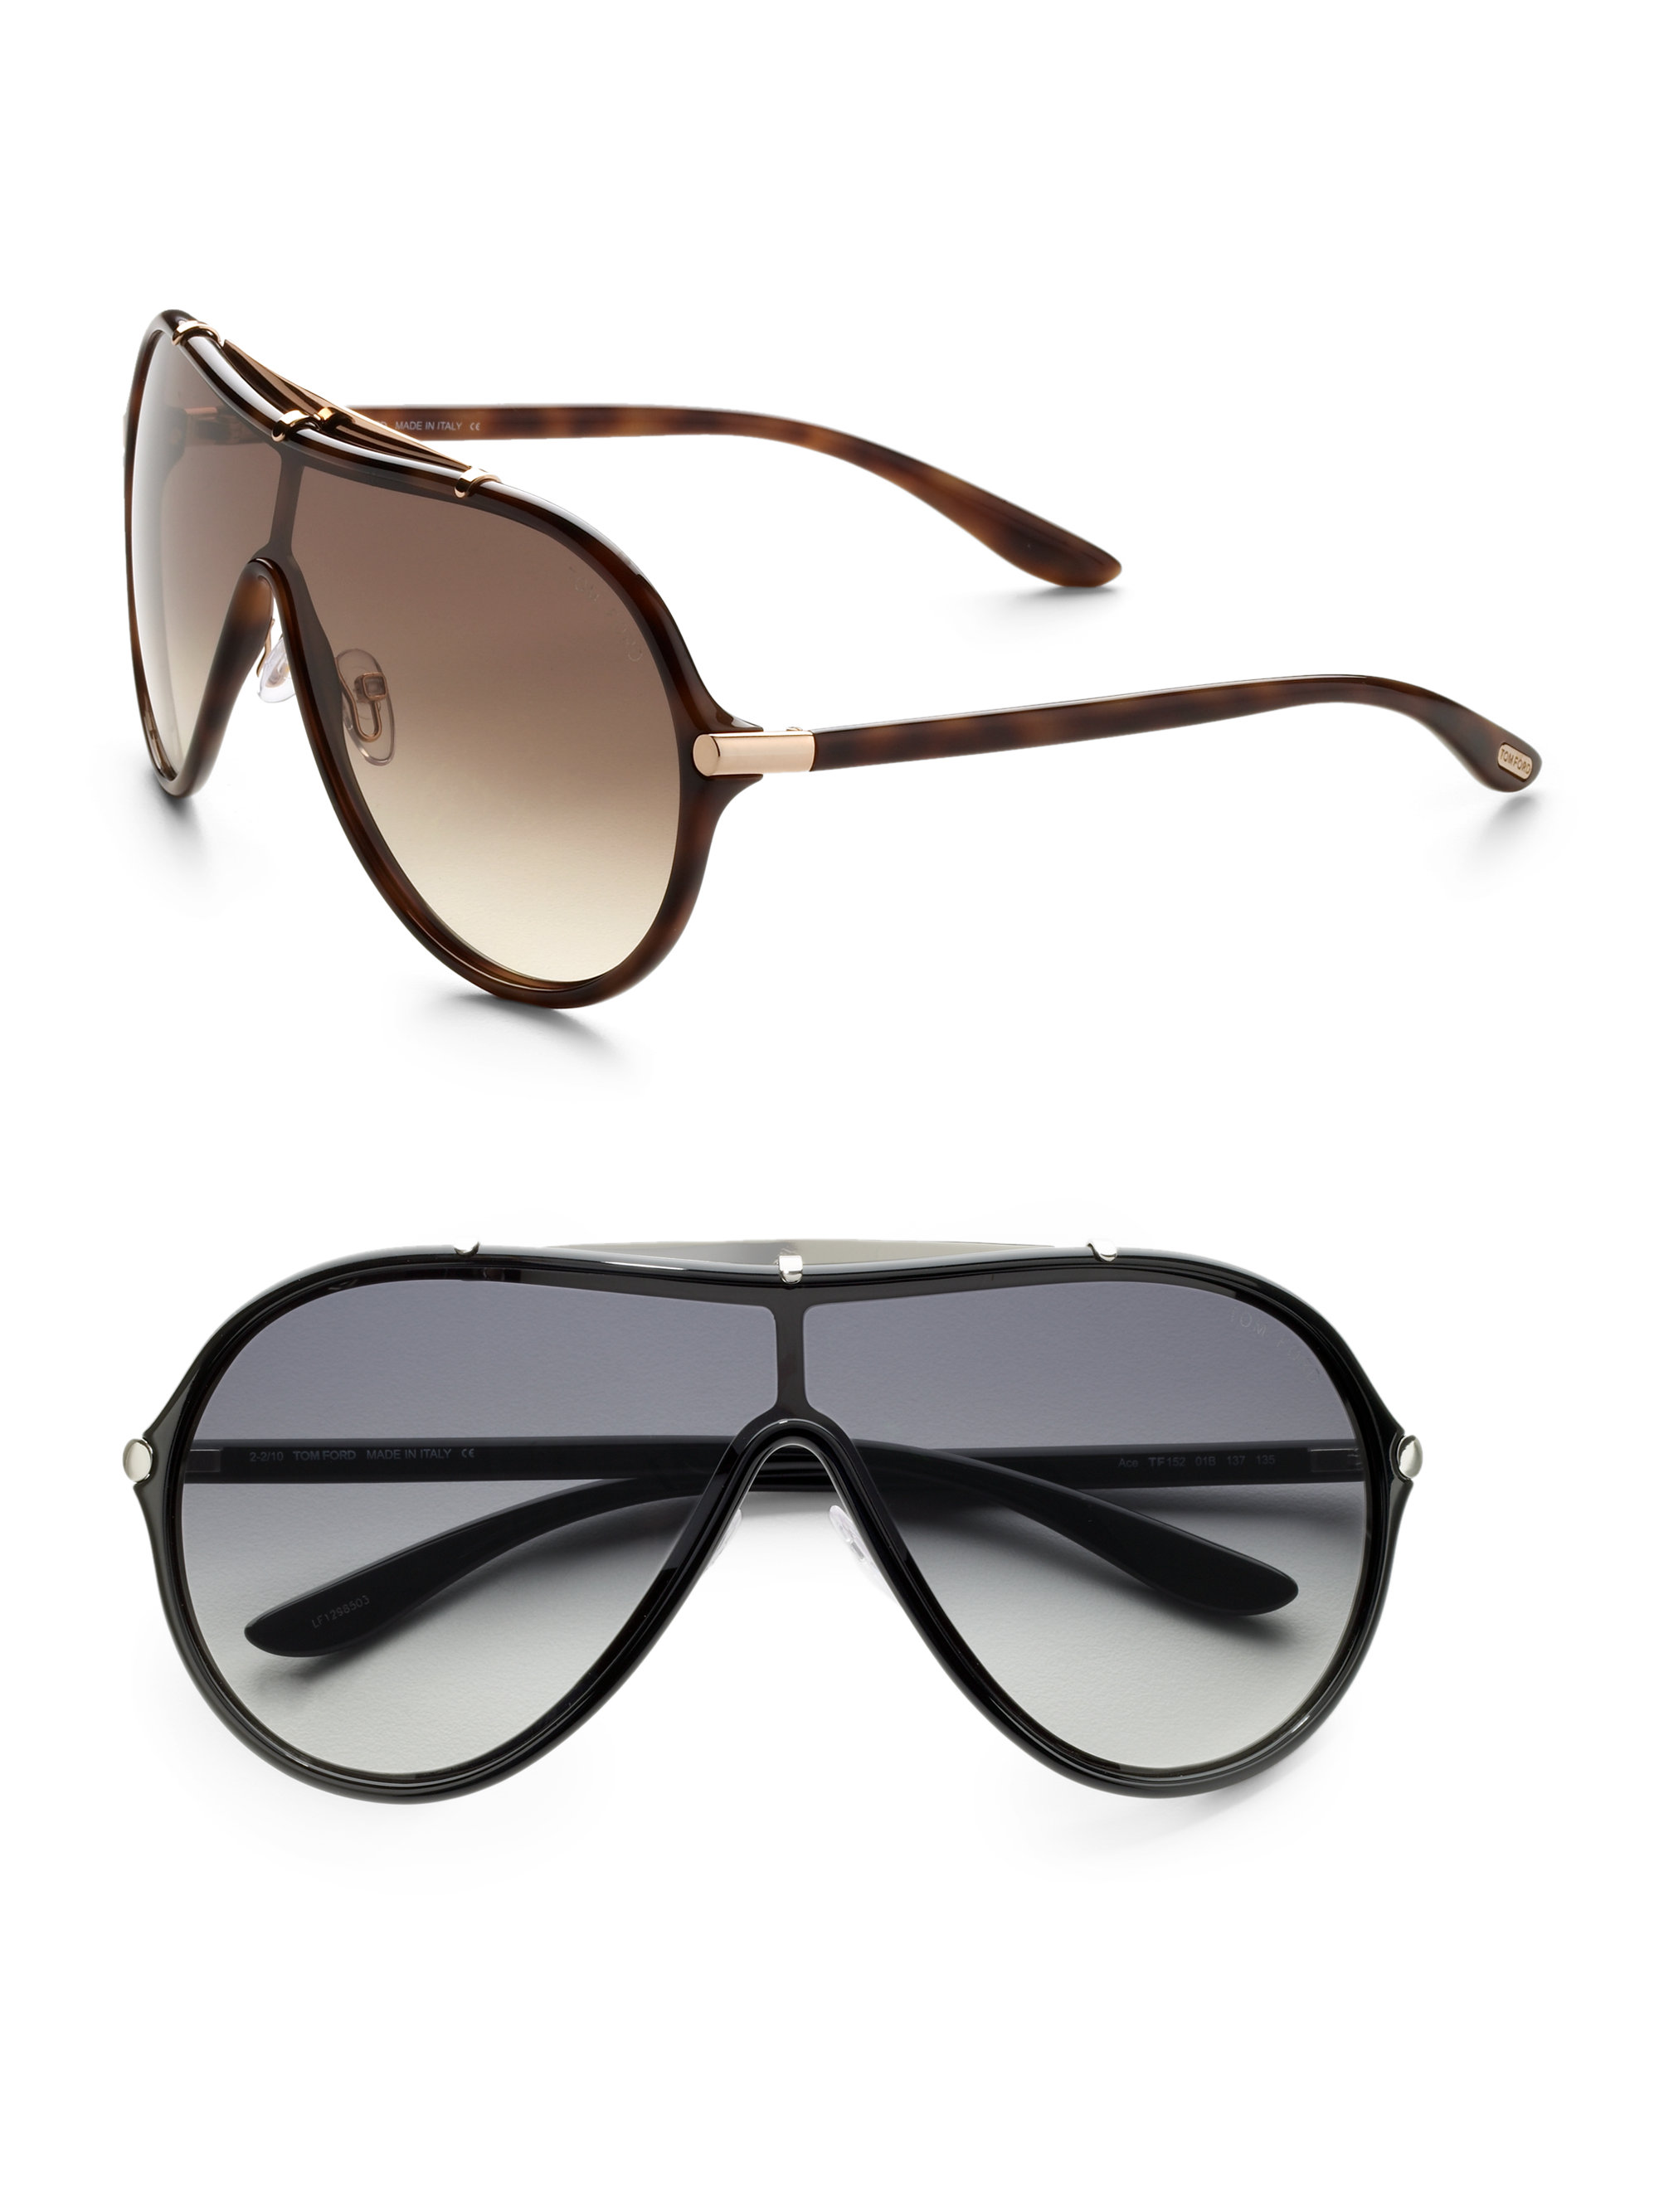 Tom ford ace oversized shield sunglasses